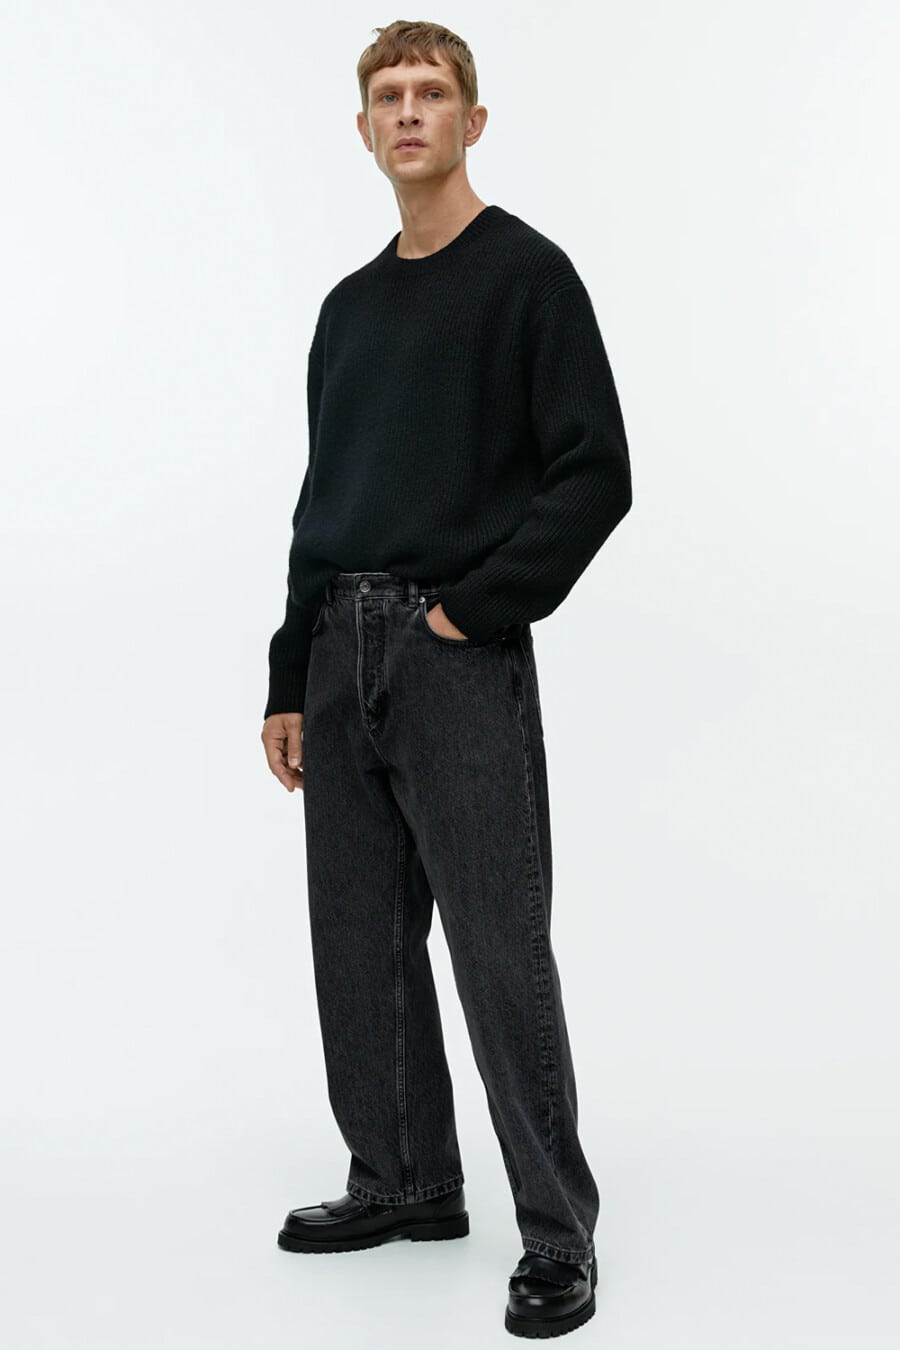 Men's black baggy jeans, oversized black sweater and black chunky fringed loafers outfit